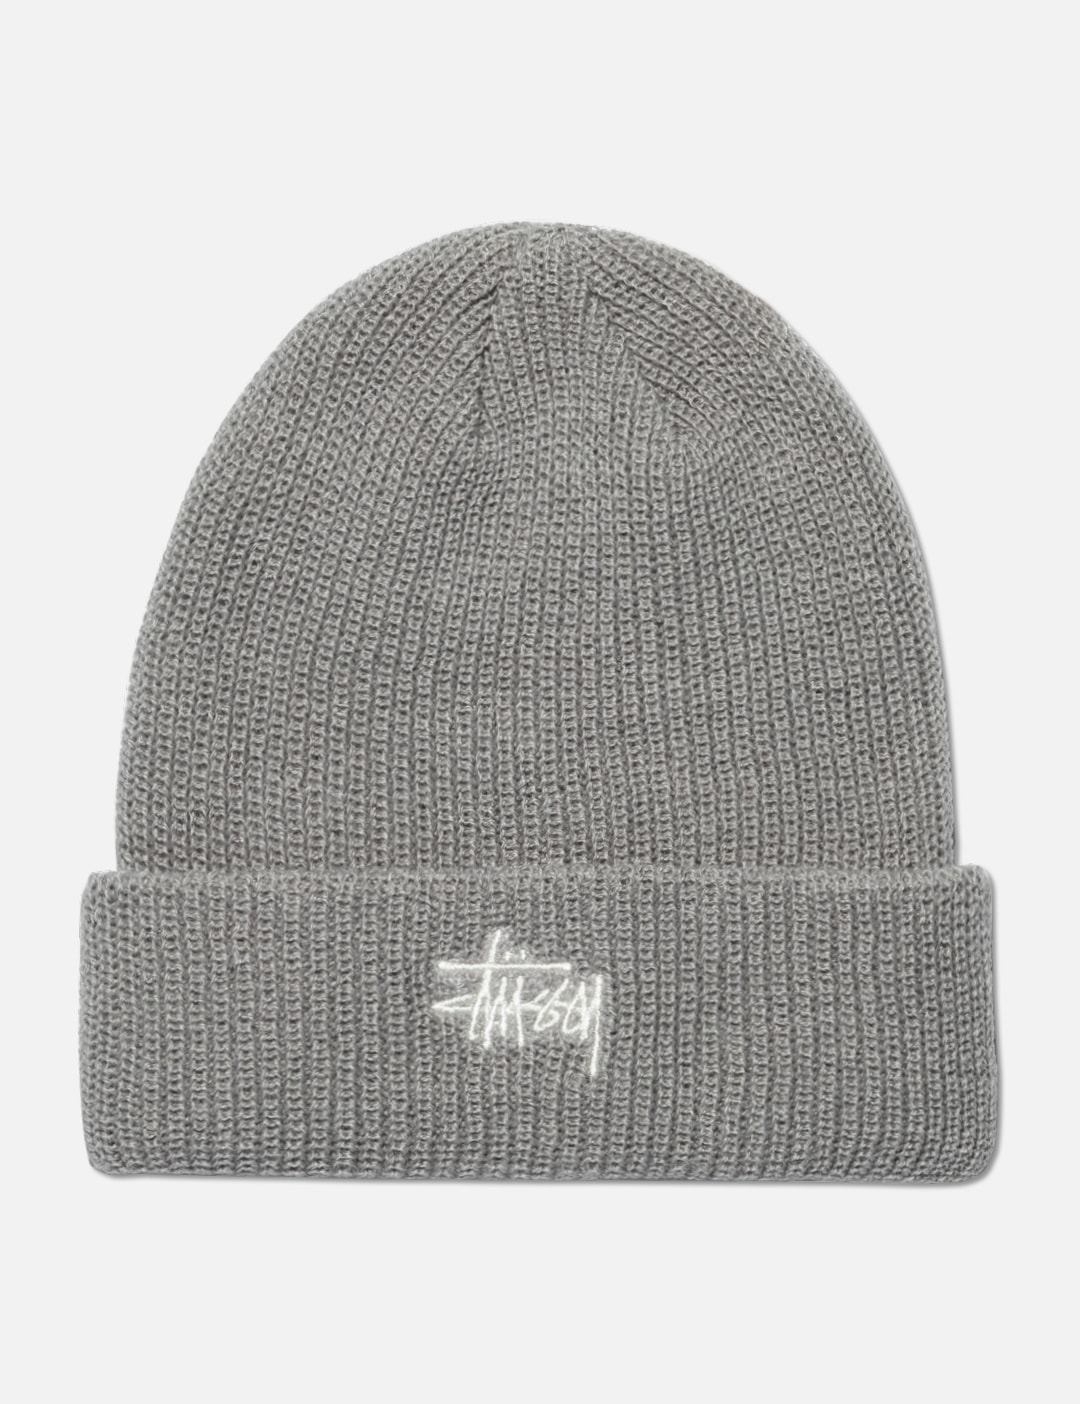 Stüssy - Basic Cuff Beanie | HBX Globally Curated and Lifestyle by Hypebeast